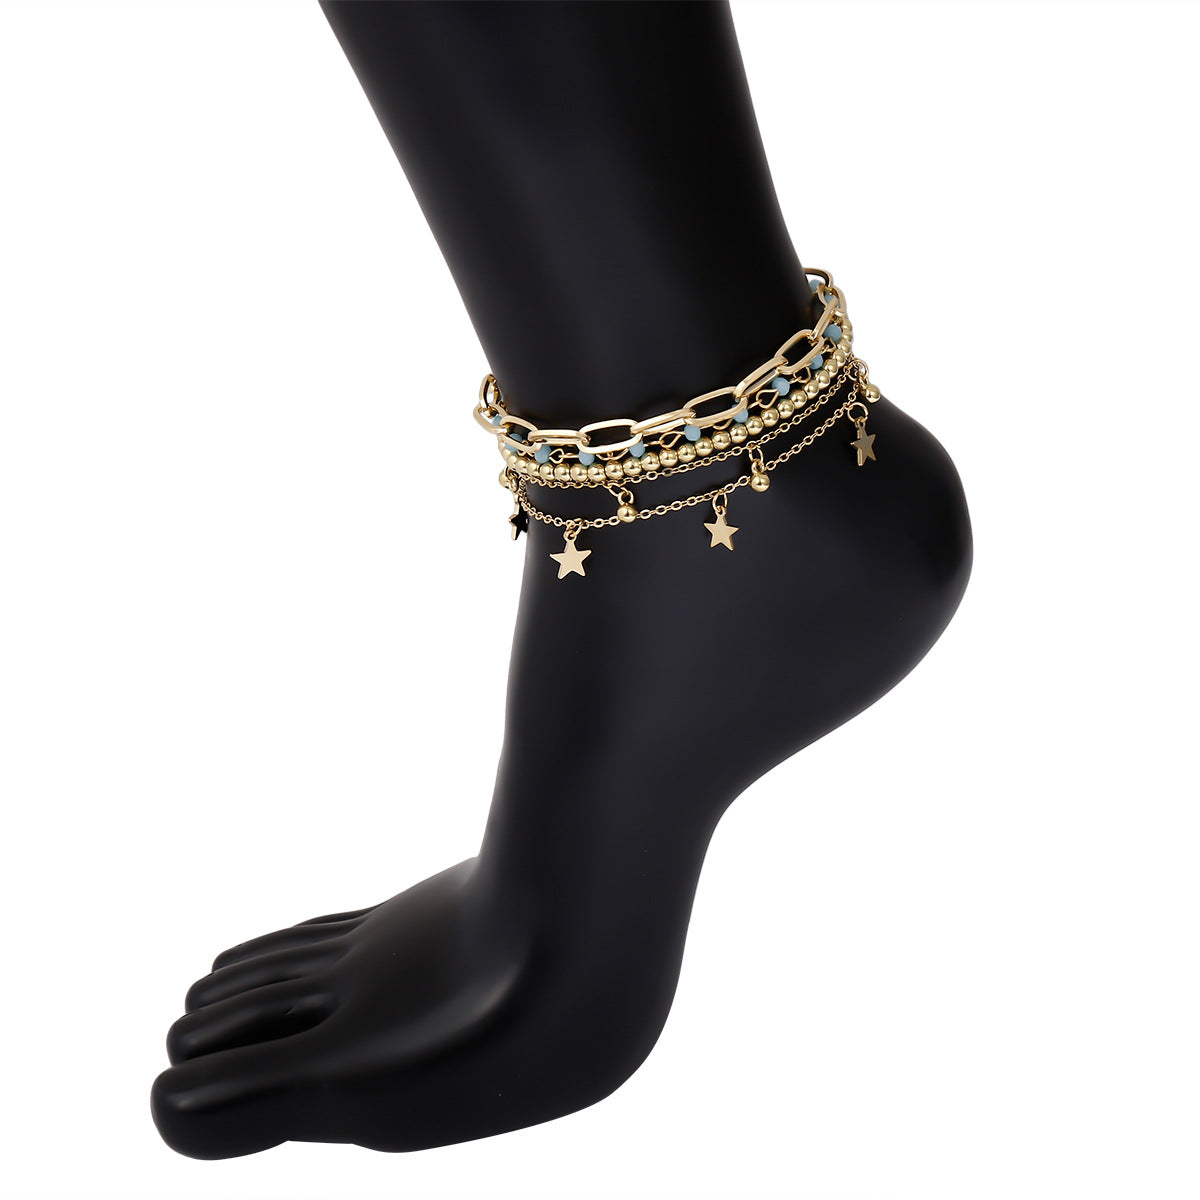 Hollow Multi-Layer Foot Ornaments Anklets